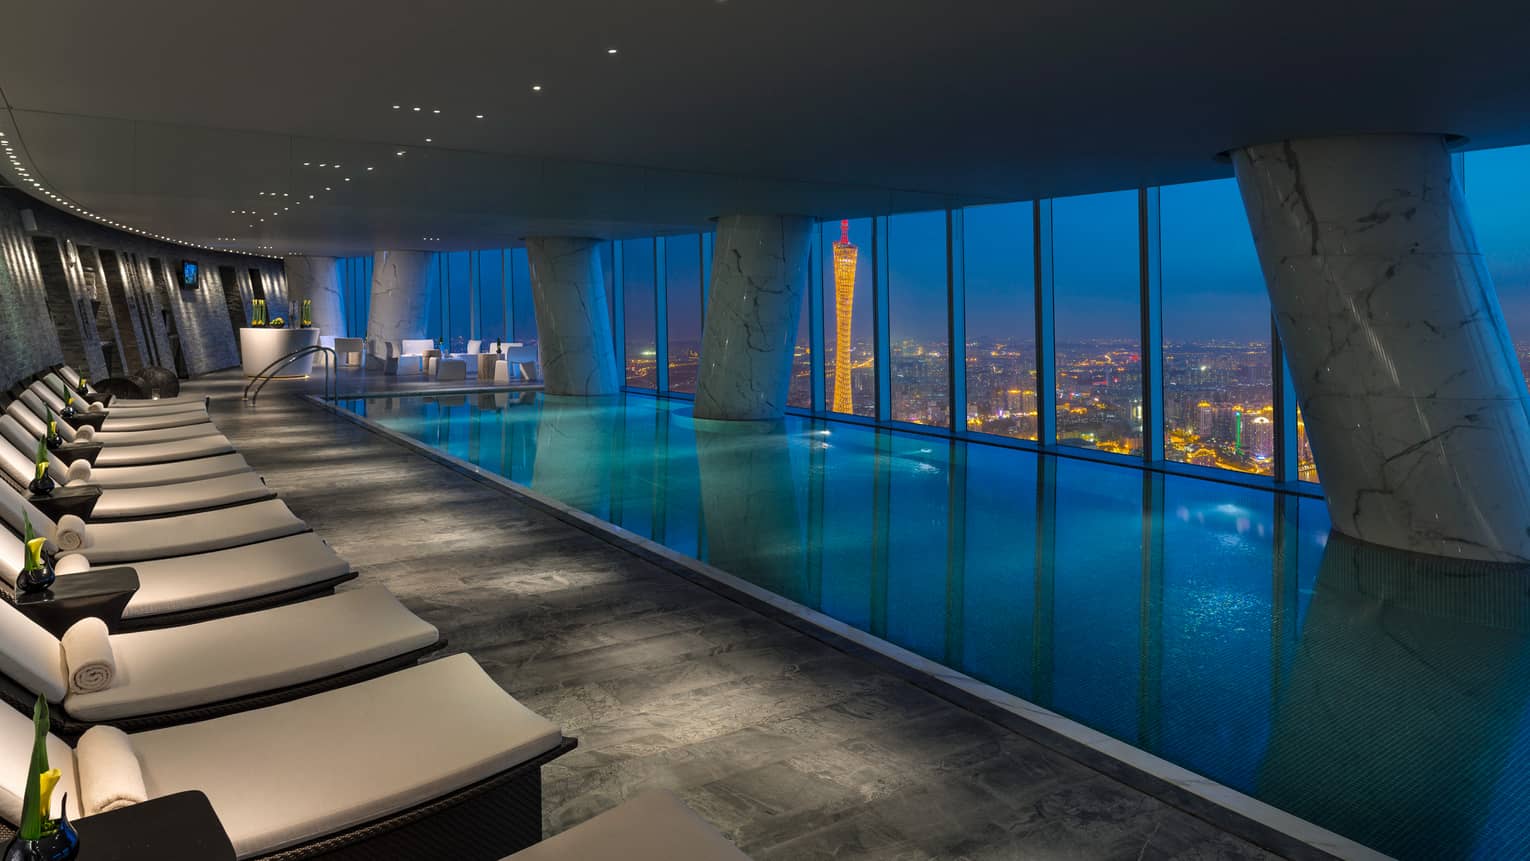 White chairs and indoor pool on 69th floor at night, beside windows overlooking city lights and Pearl River